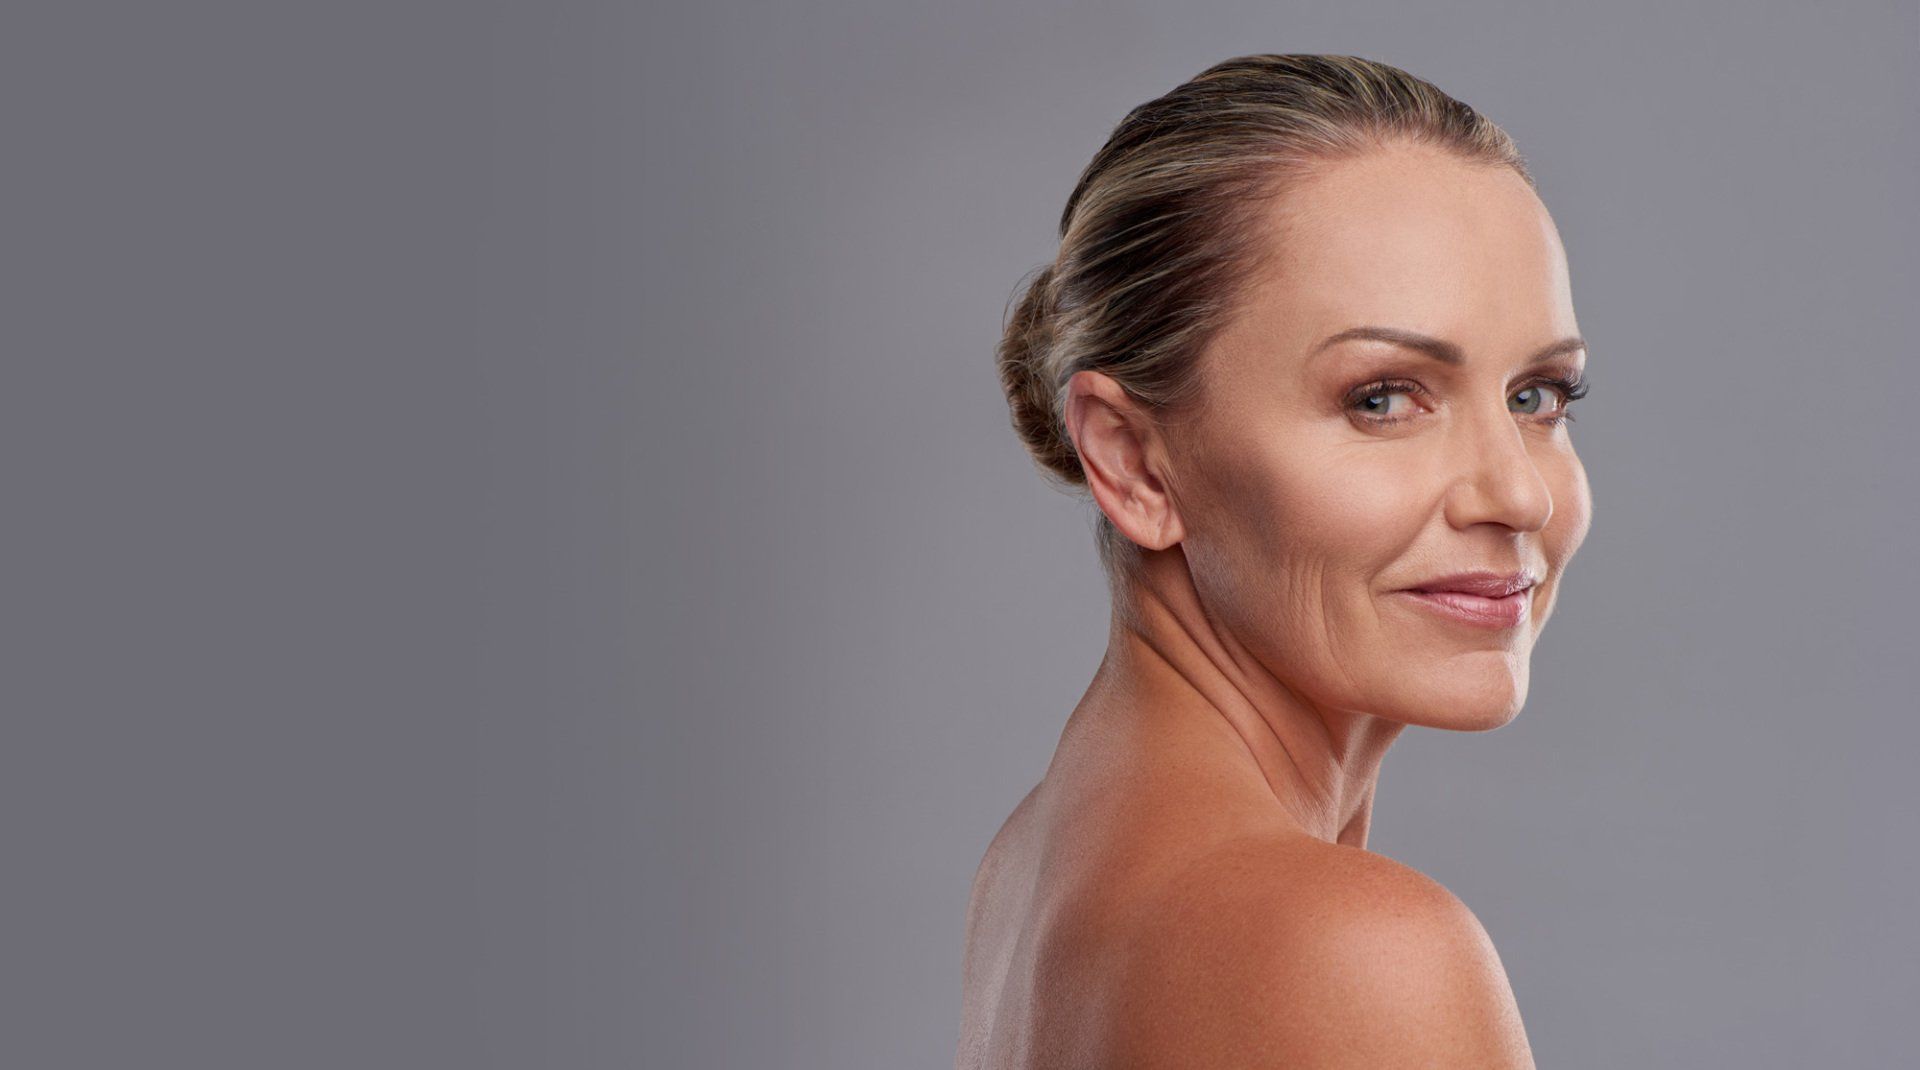 Pioneering non-surgical treatments that deliver dramatic results